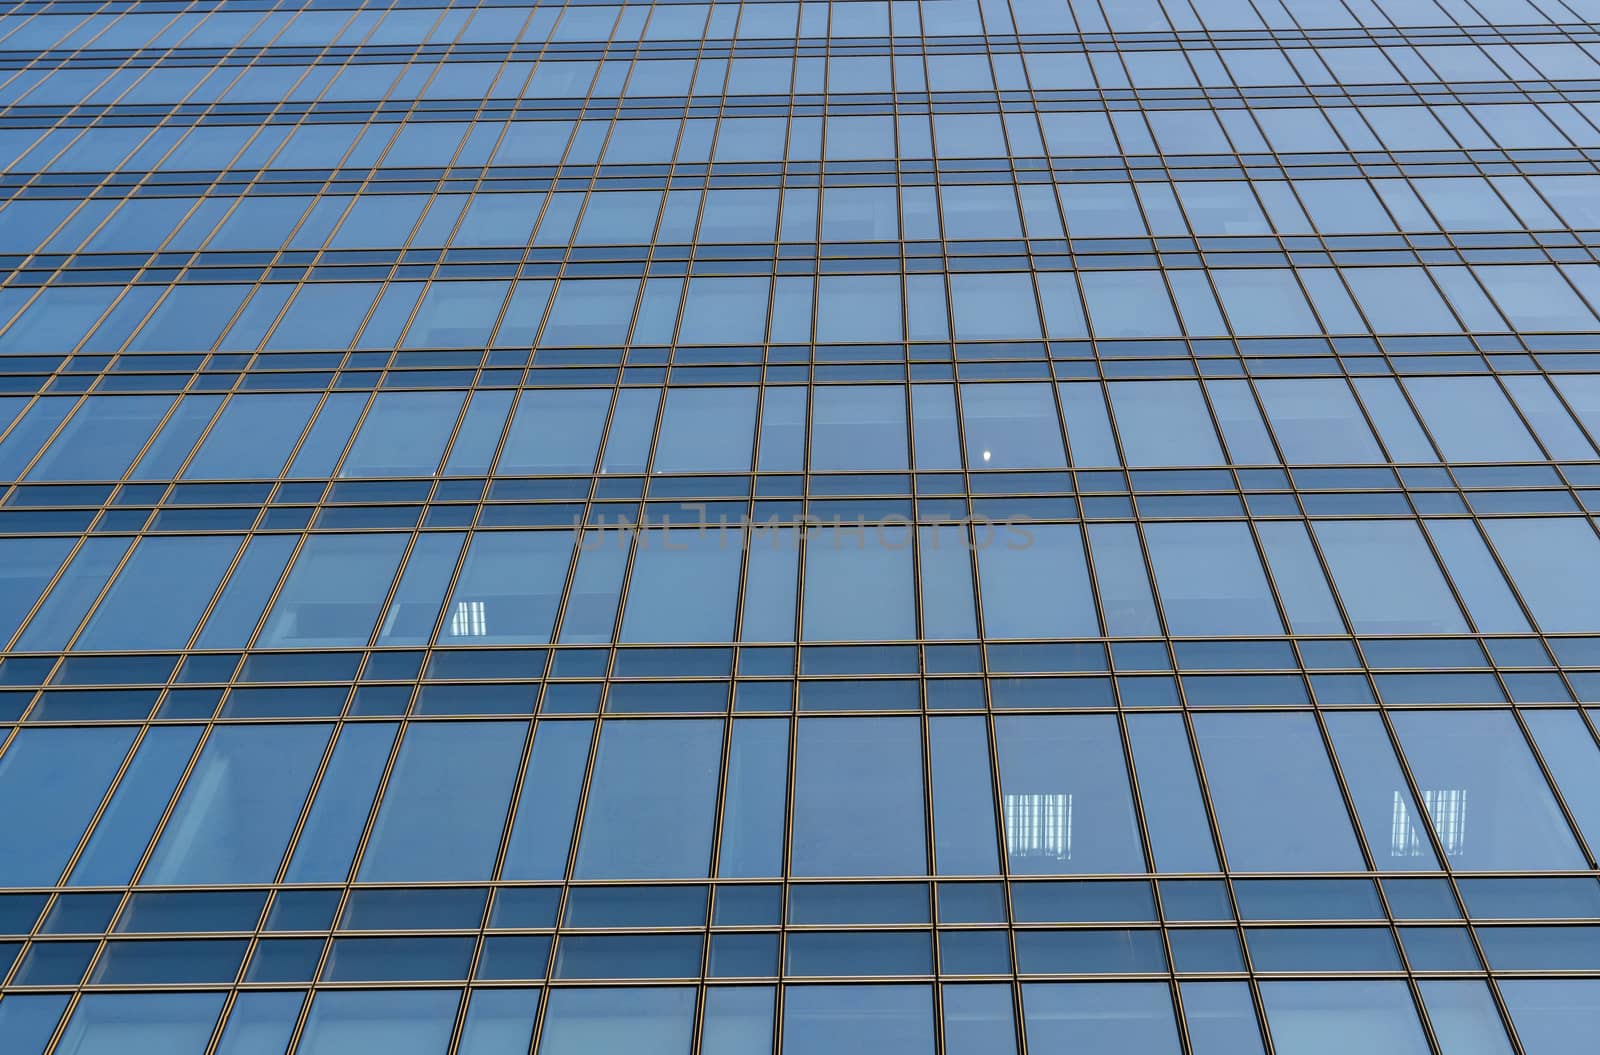 Reflection of the sky in the windows of a building. Perspective and underdite angle view to modern glass building skyscrapers over blue sky. Windows of Bussiness office or corporate building. by vovsht